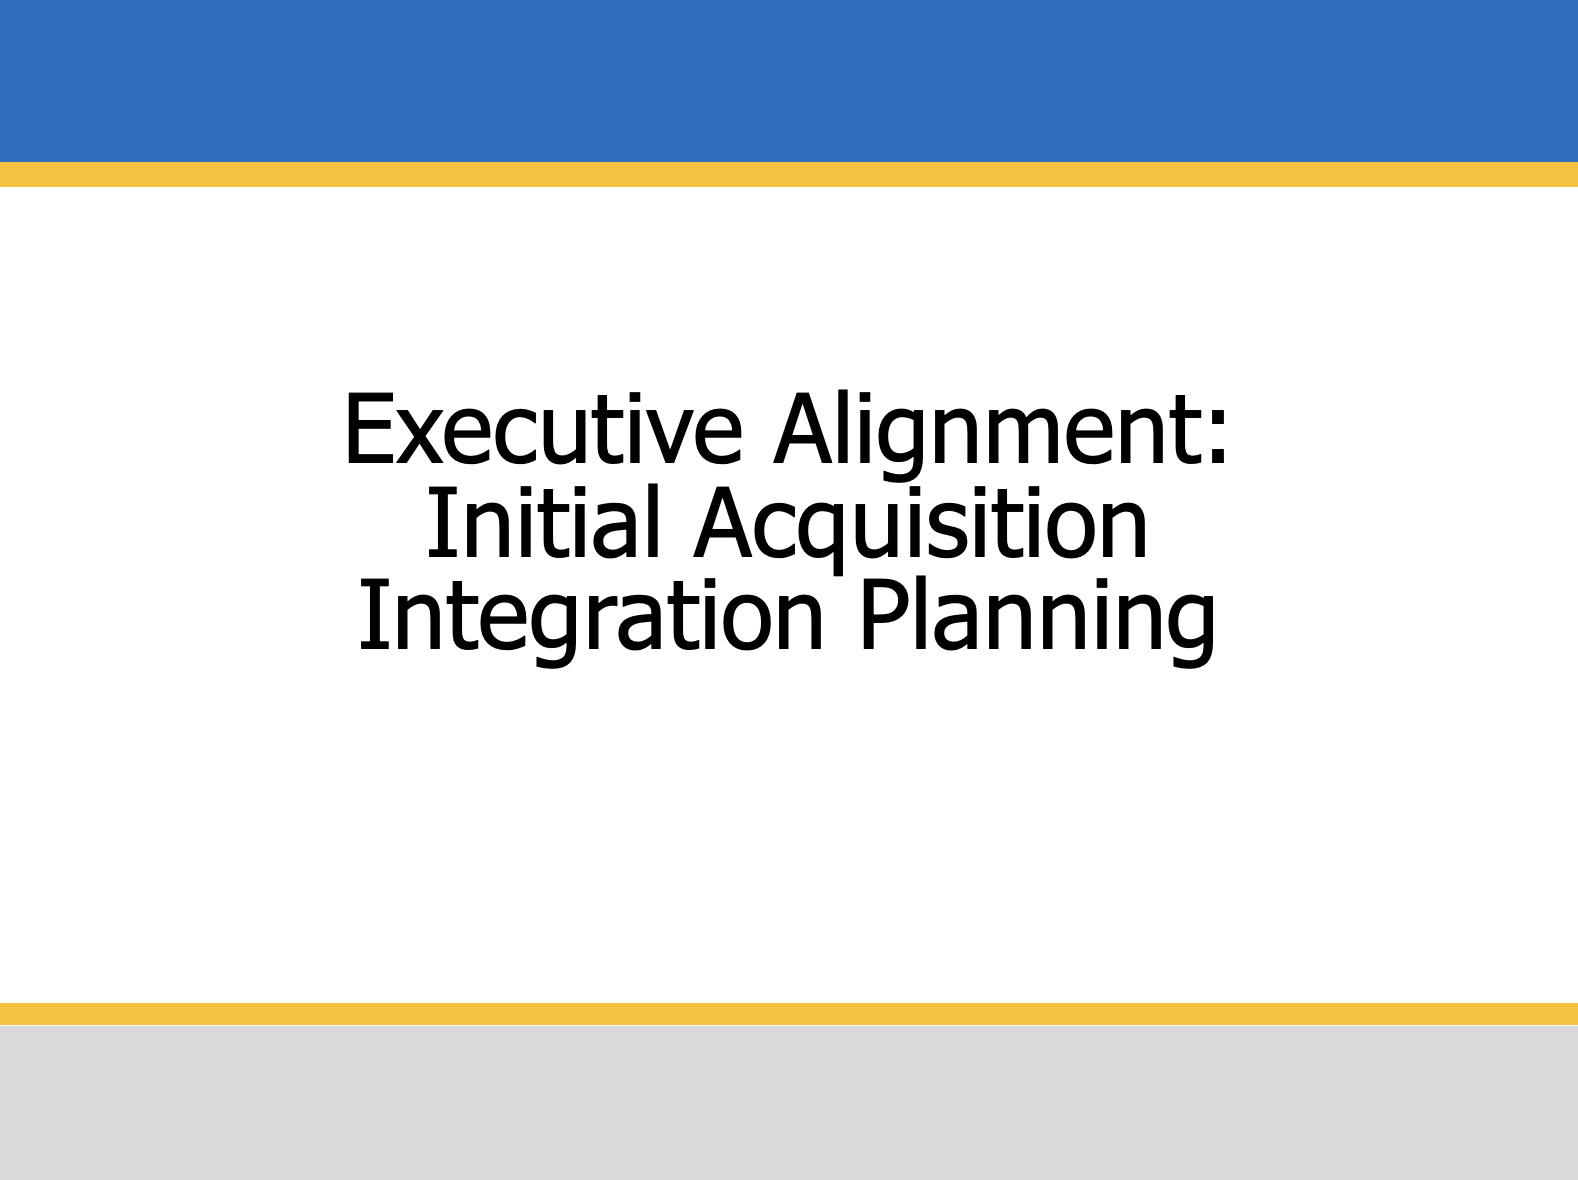 Executive Alignment: Initial Acquisition Integration Planning